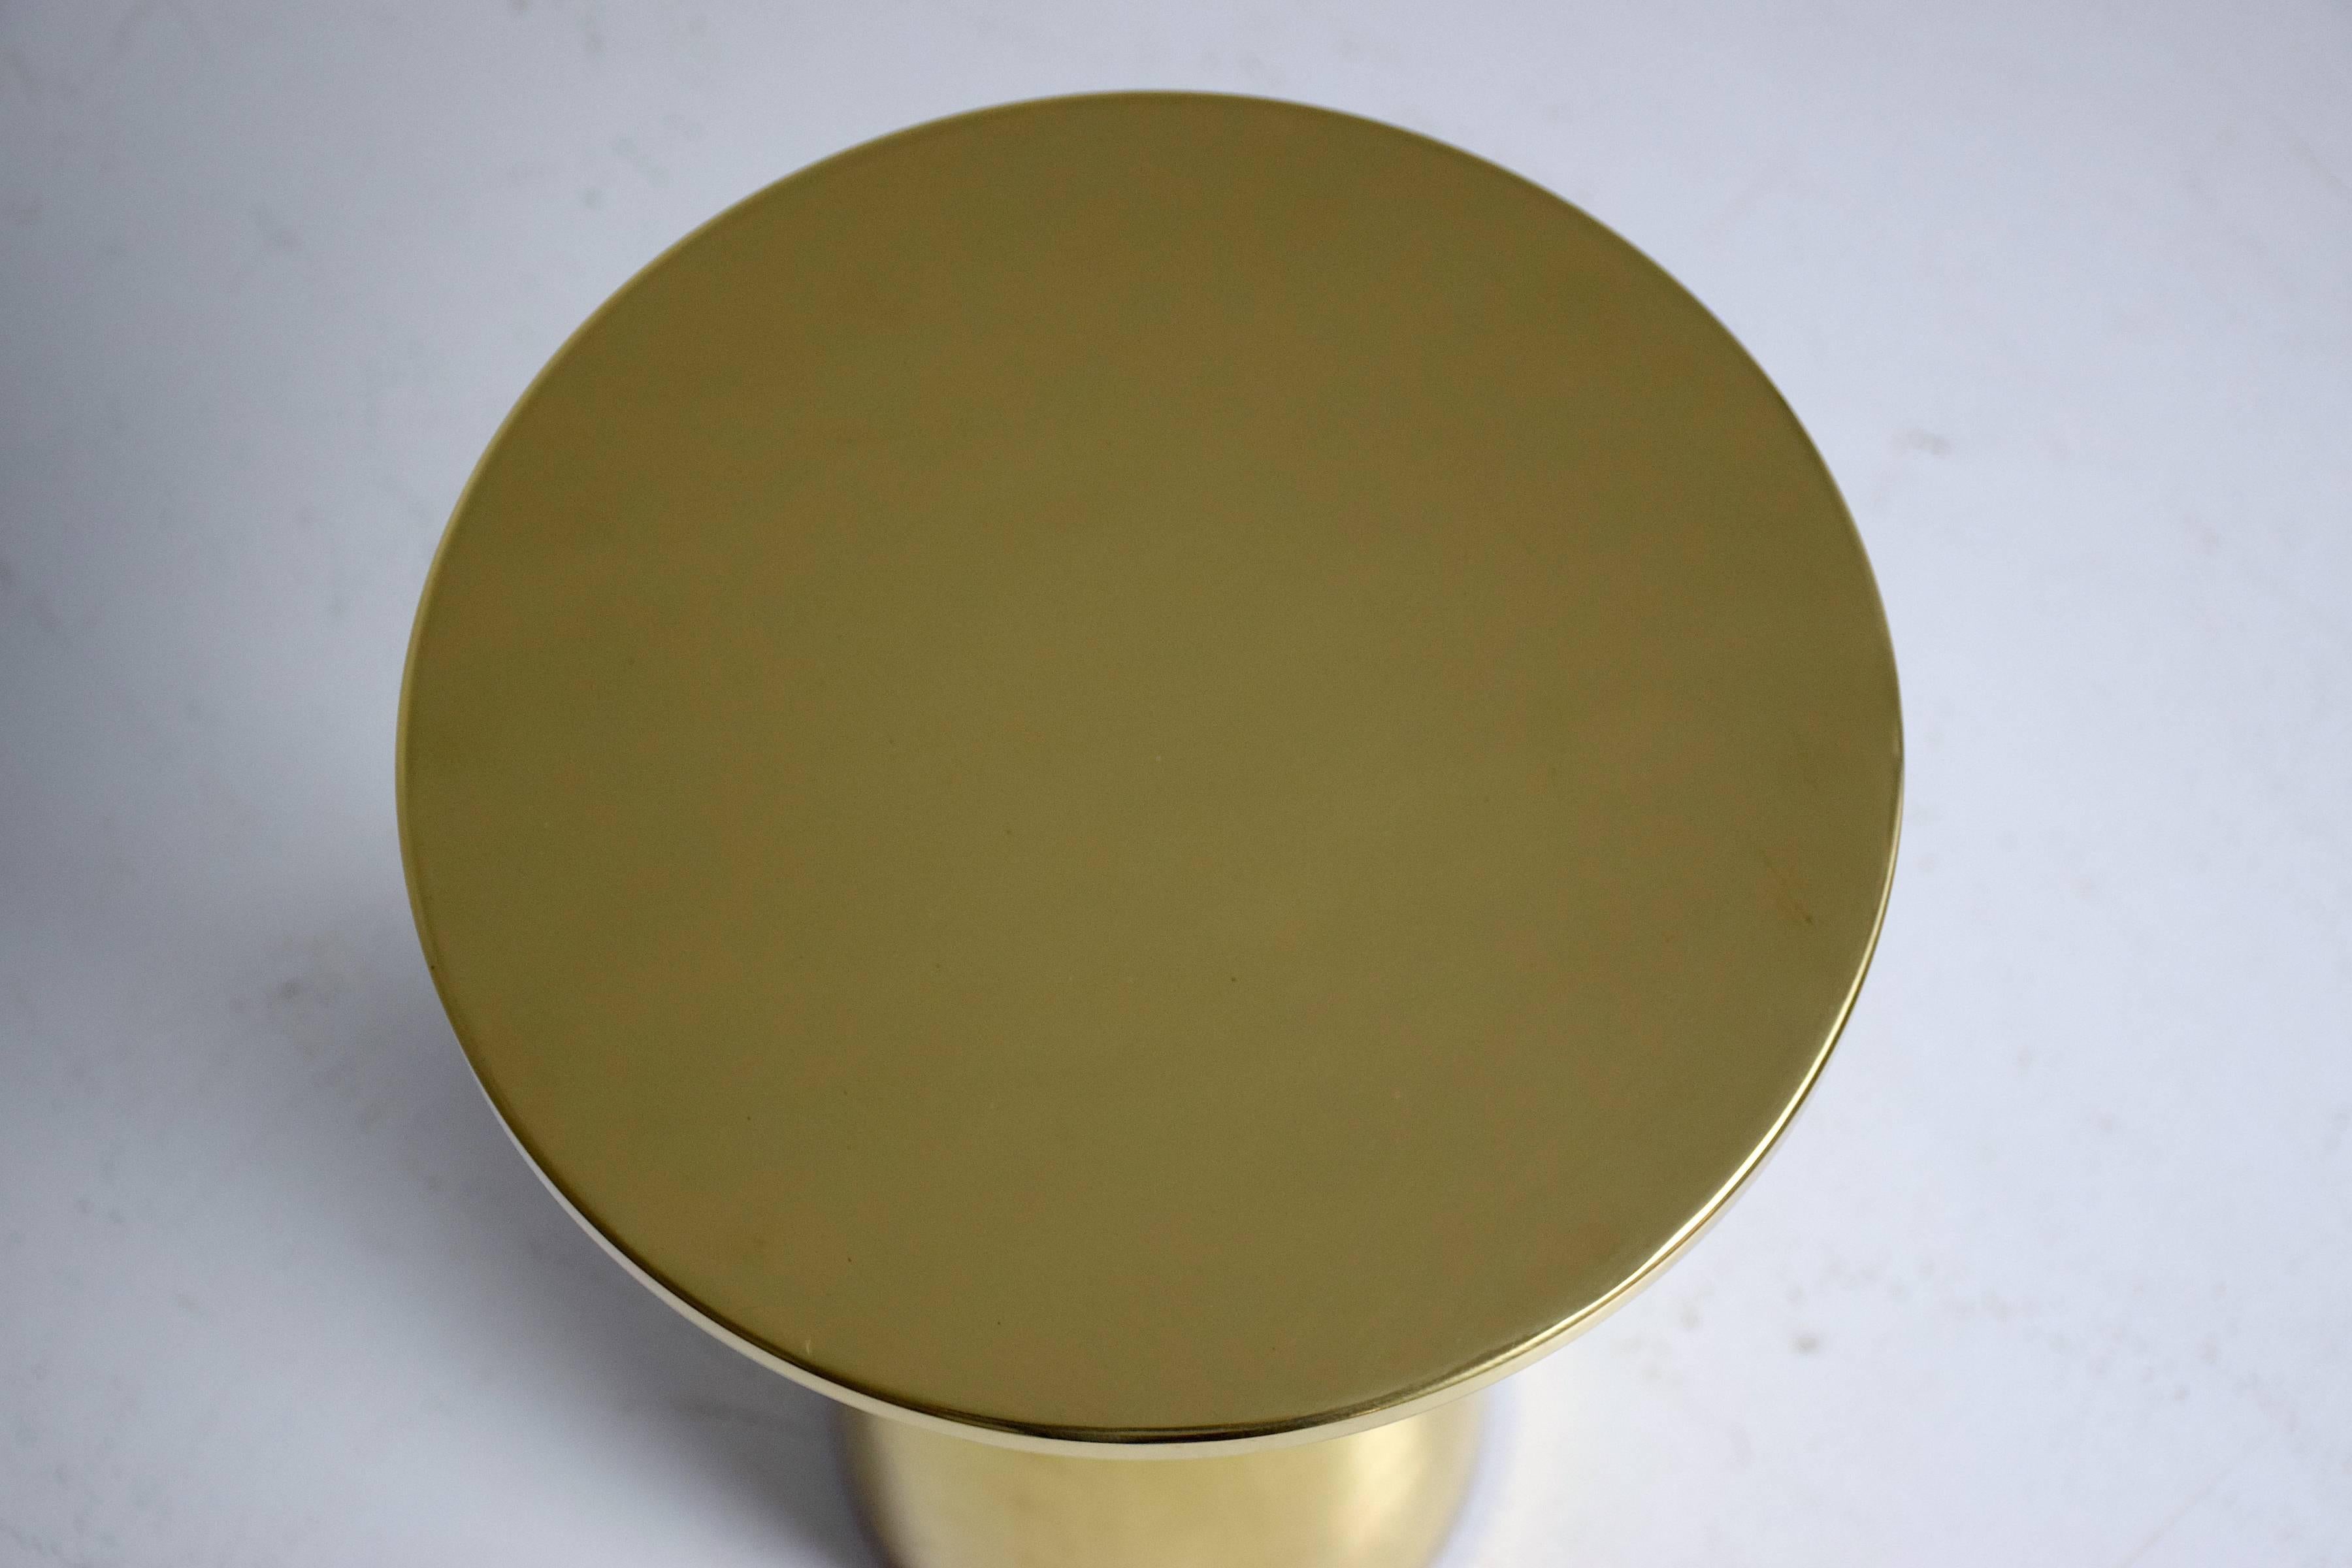  Pair of Or-Ora handcrafted brass side tables by Jonathan Amar Studio  For Sale 2